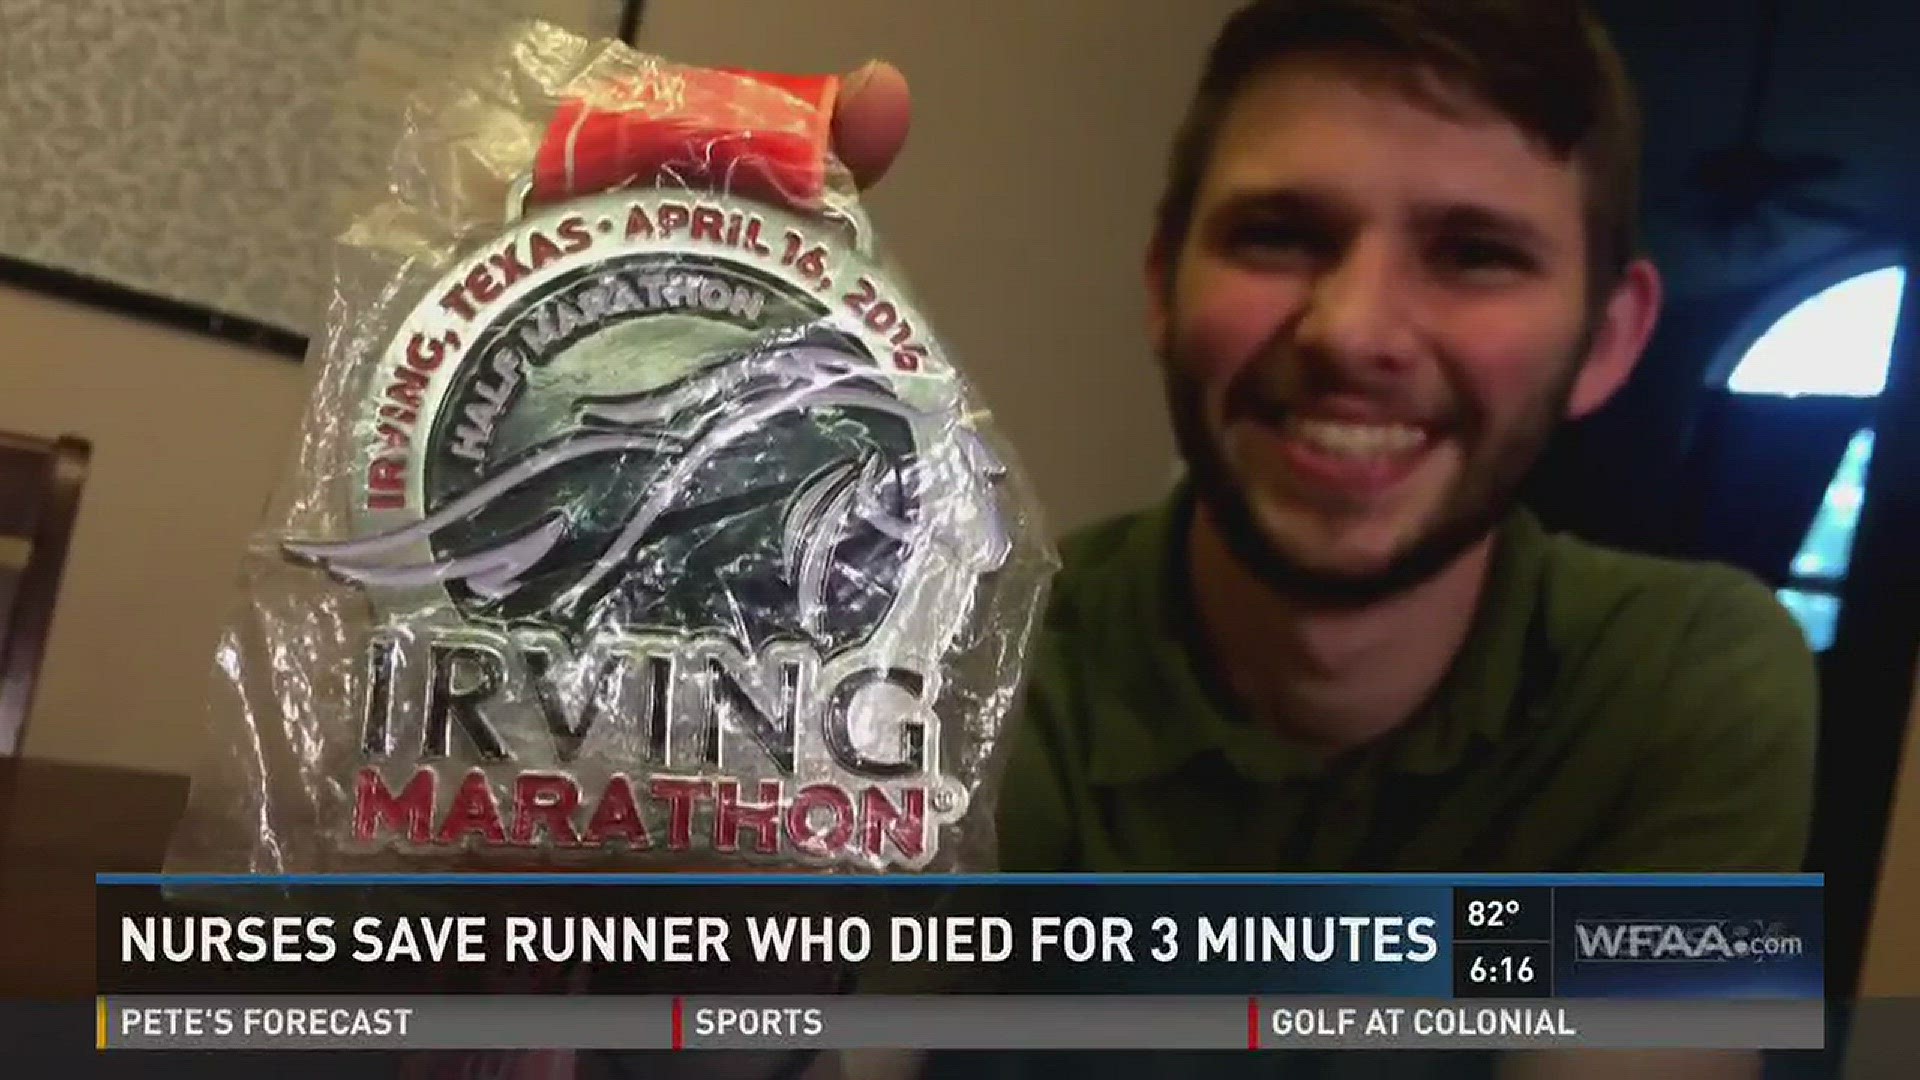 Nurses save runner who died for 3 minutes